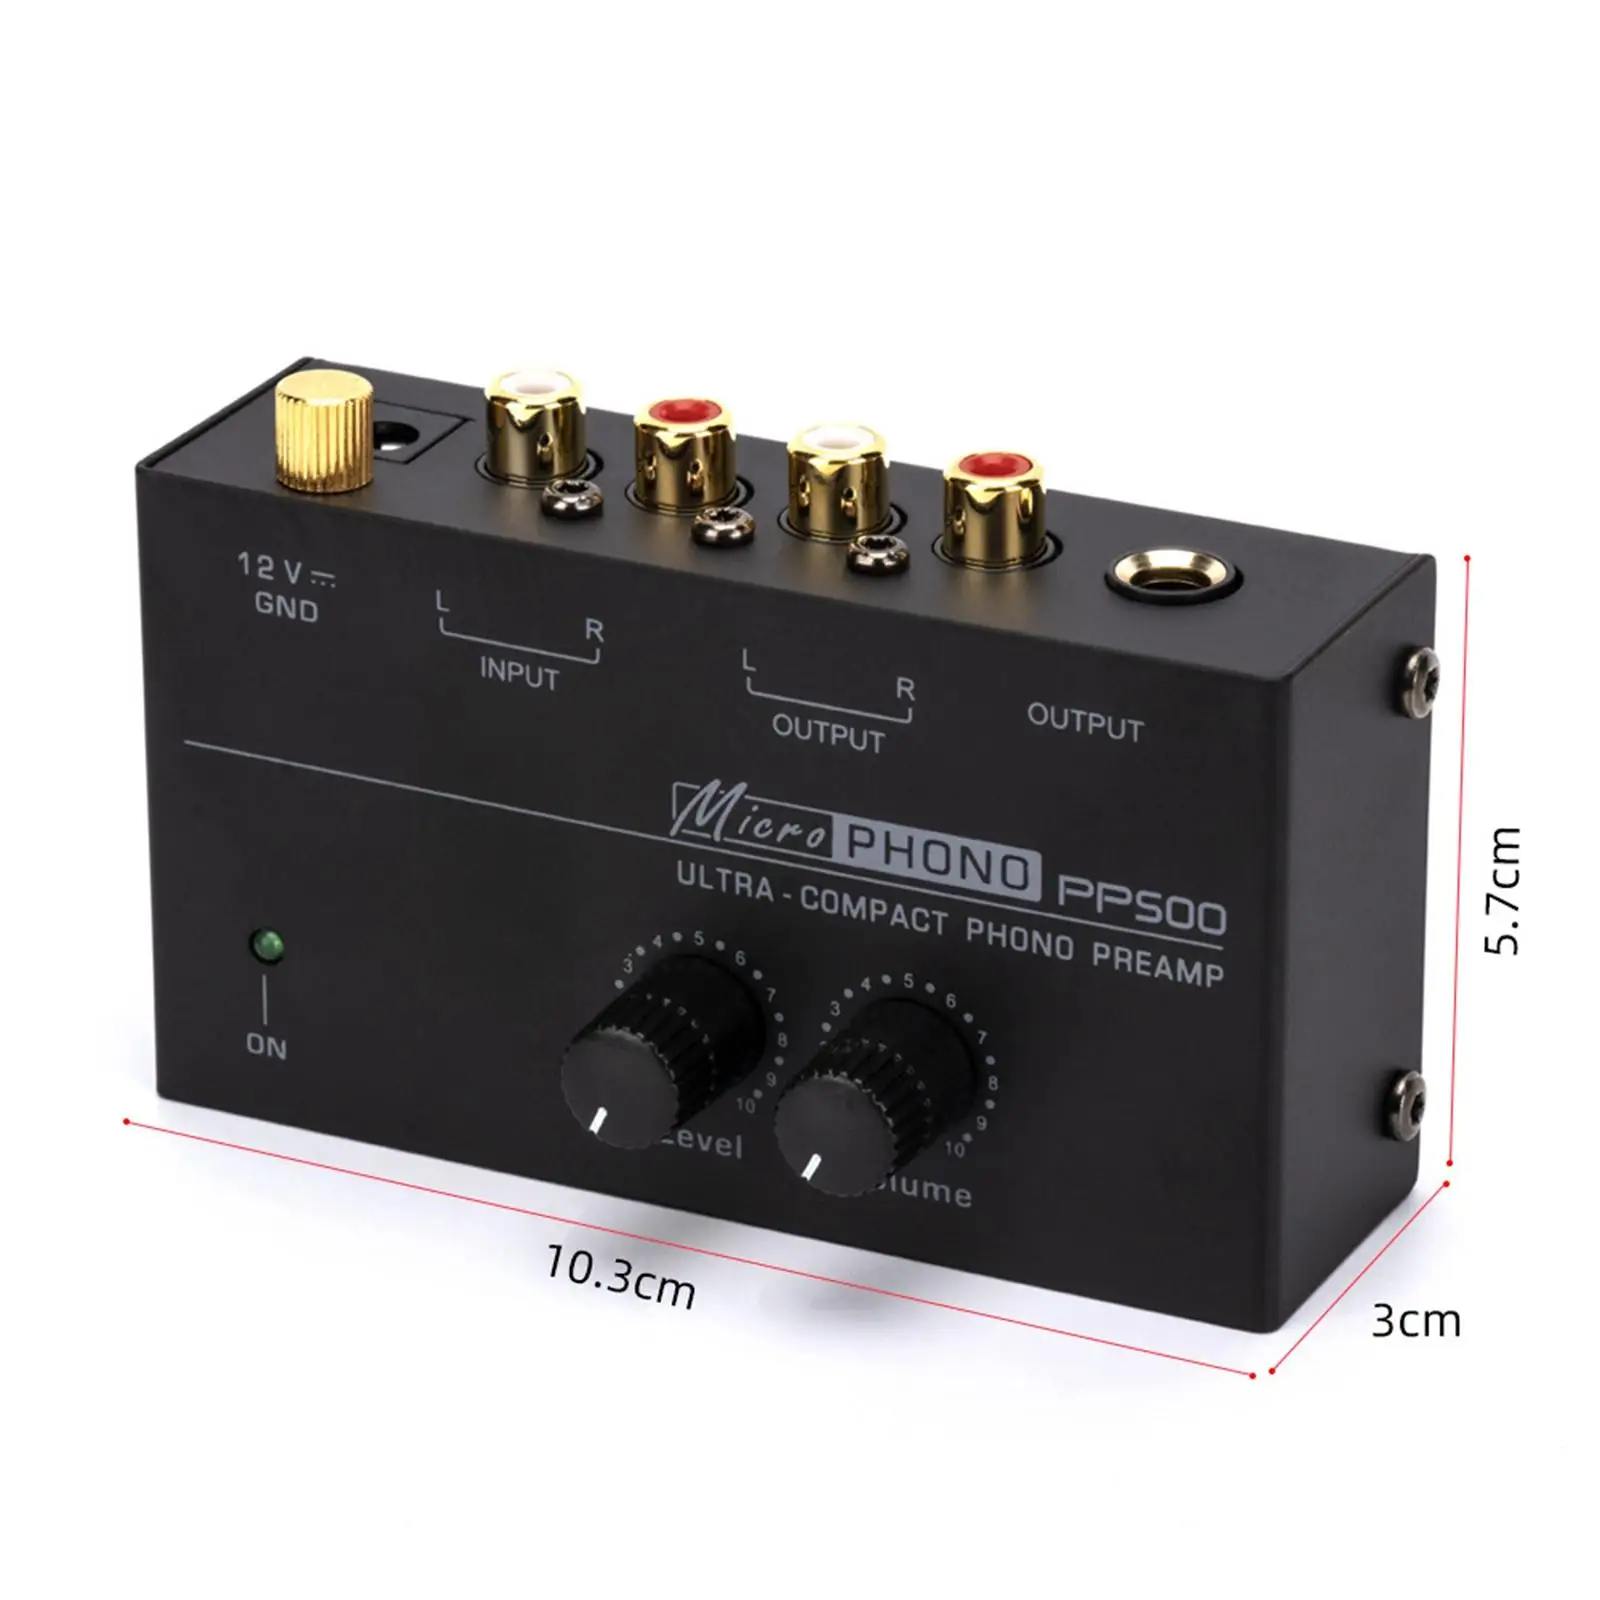 

Phono Turntable Preamp Phonograph Preamp Digital Audio 1/4" TRS Low Noise Record Player Preamp for Amplifiers Computers Speakers